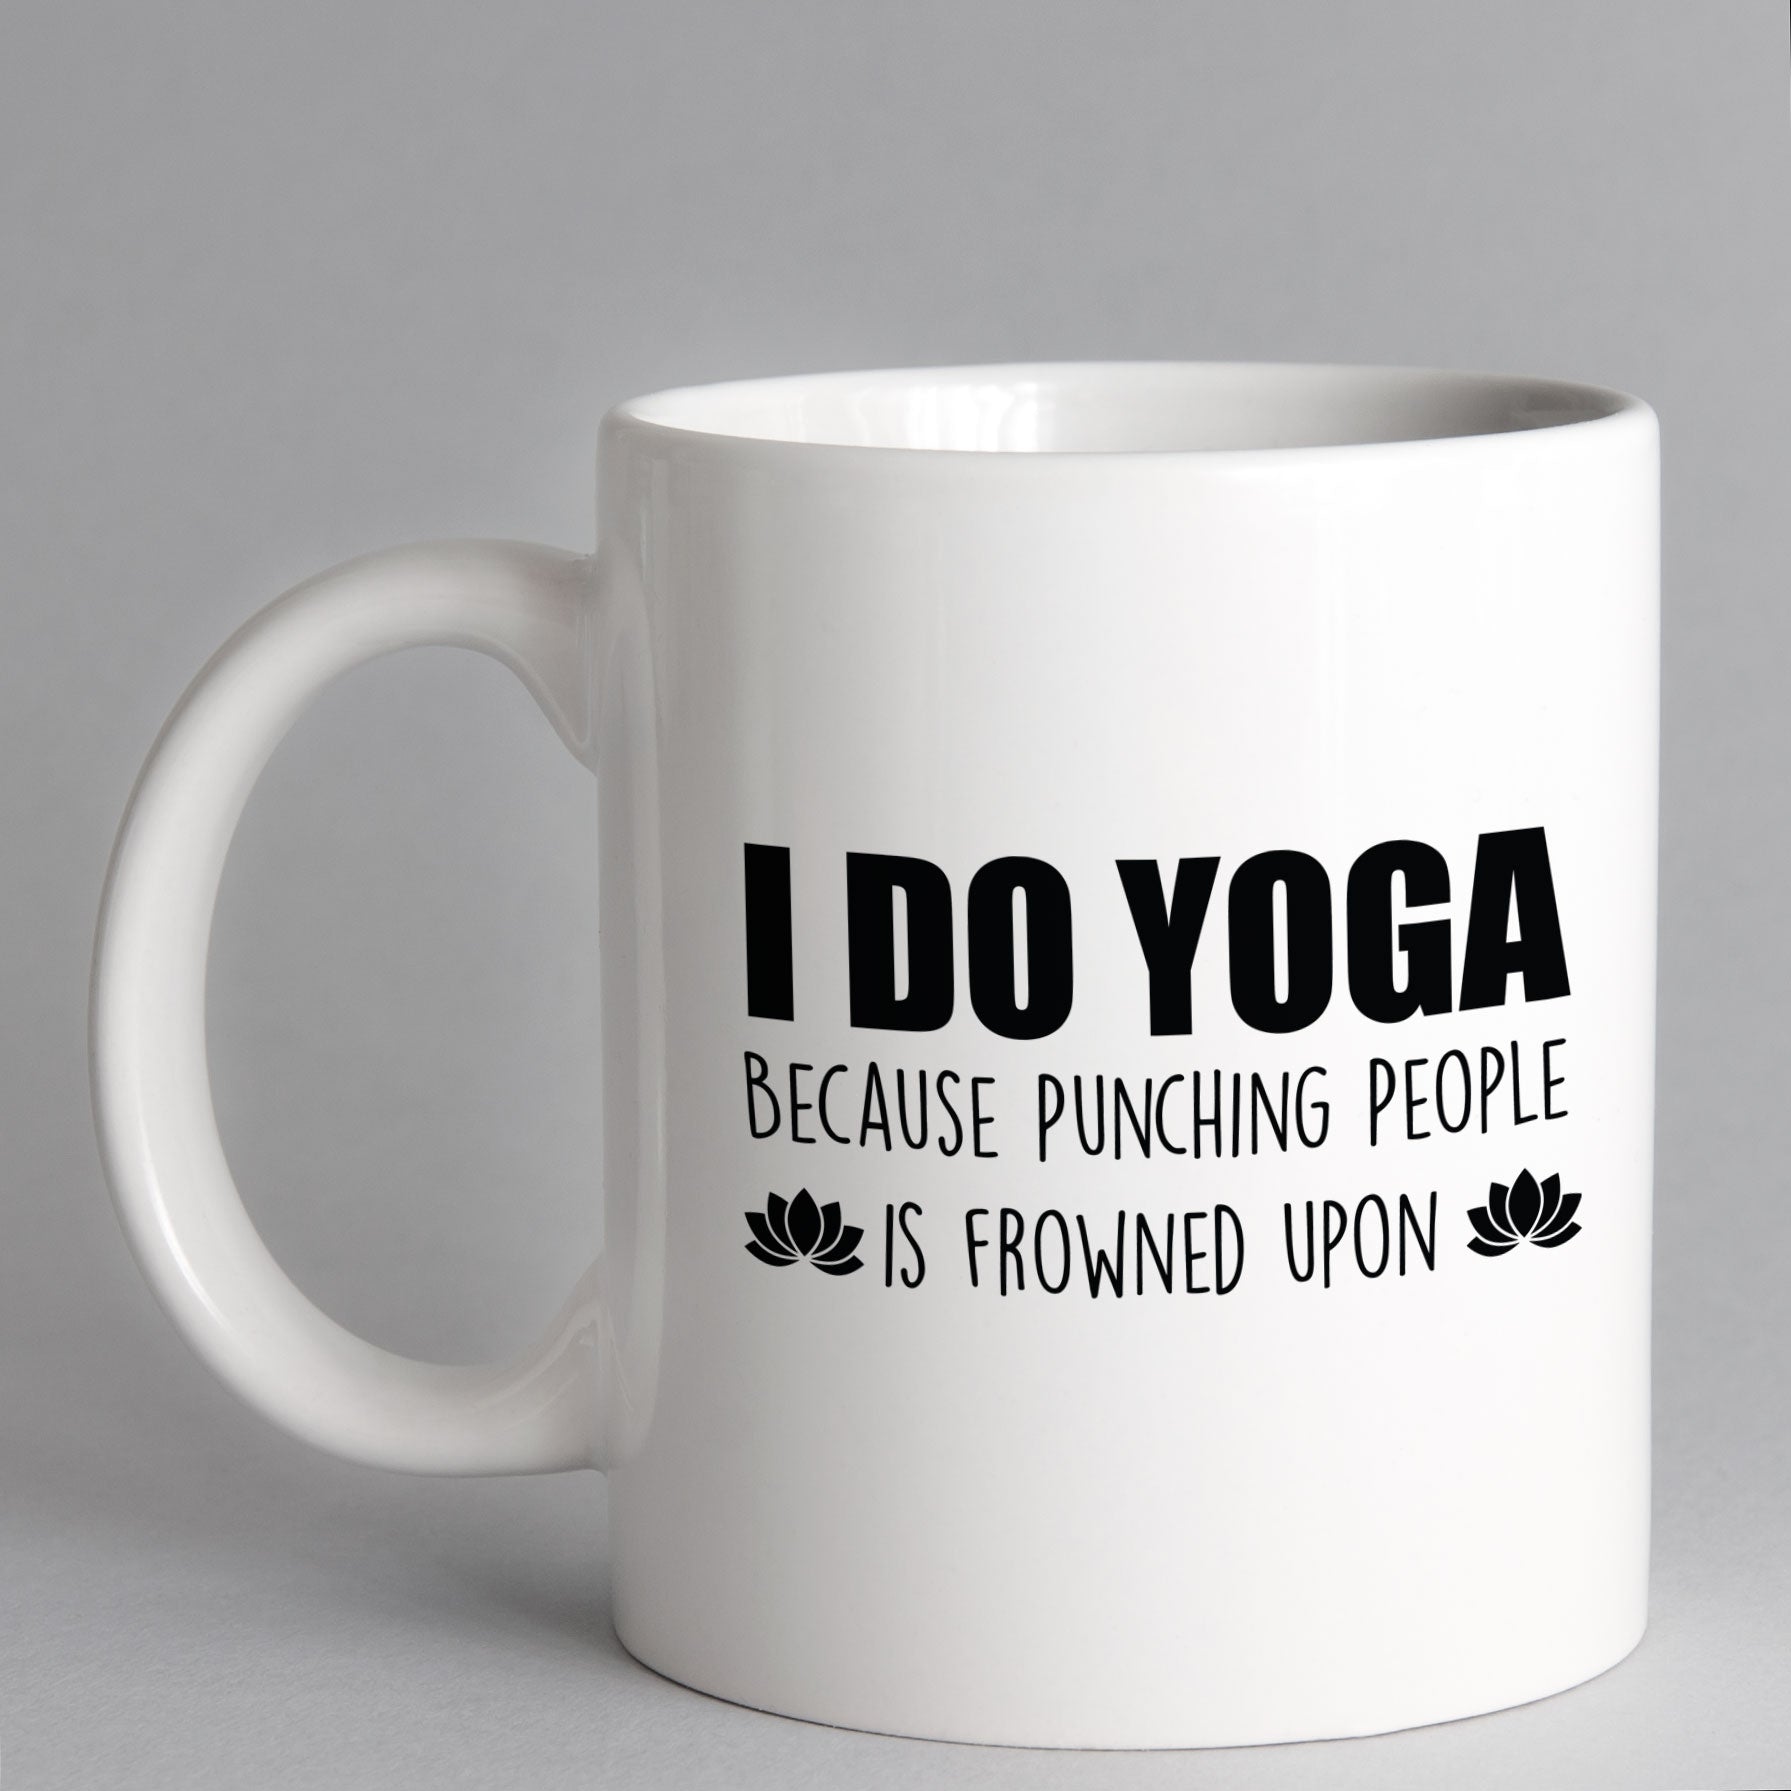 I Do Yoga Because Punching People Is Frowned Upon Mug